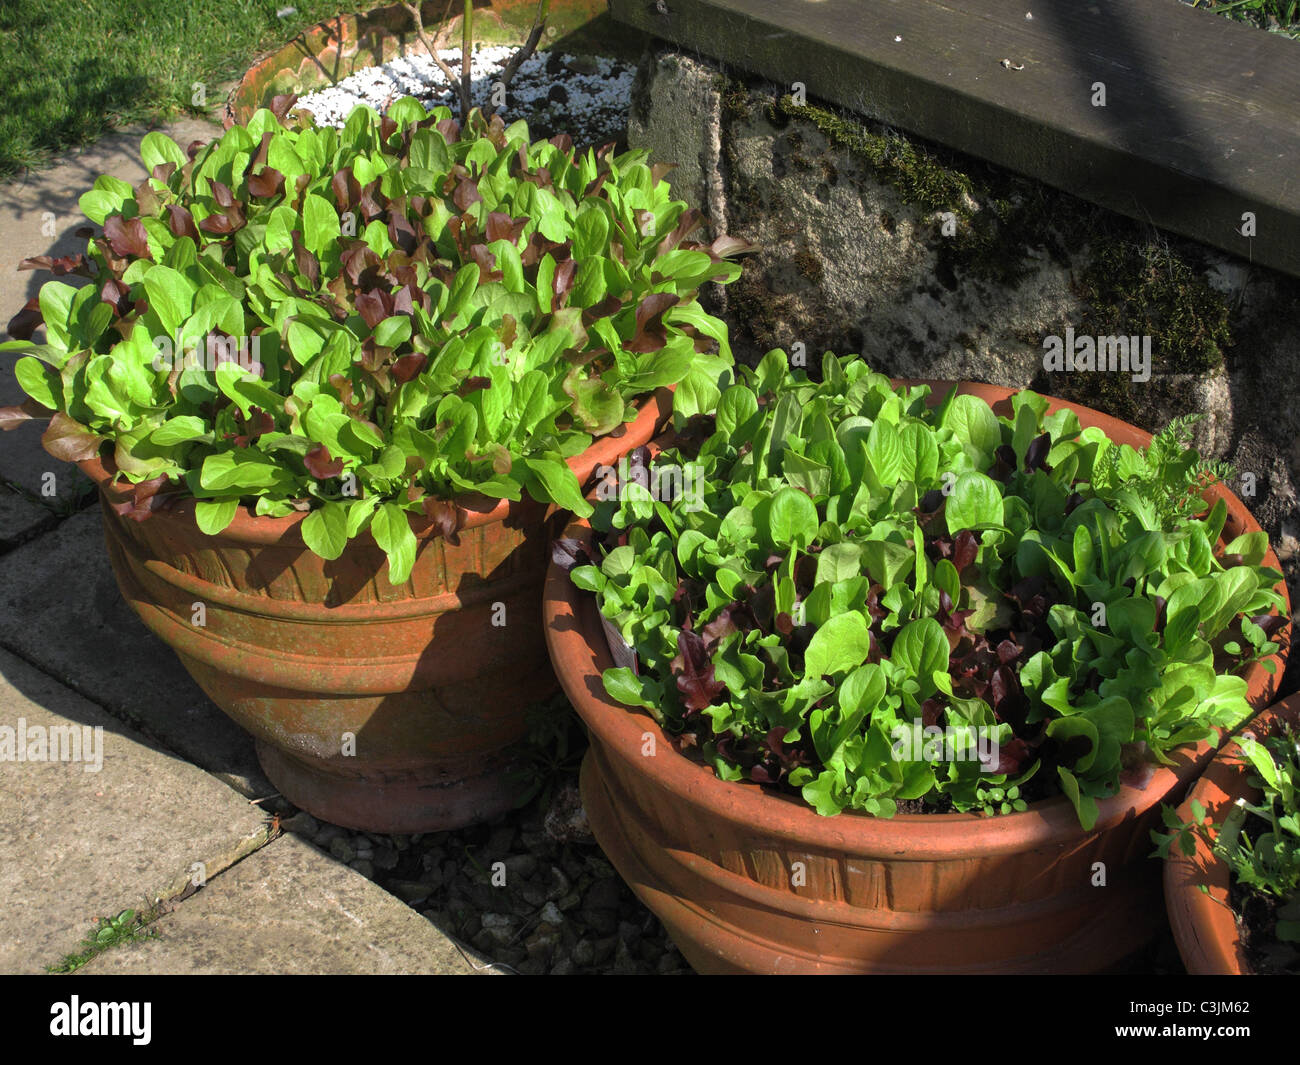 Pick and come again lettuce salad leaf vegetables growing in terracotta pots Stock Photo